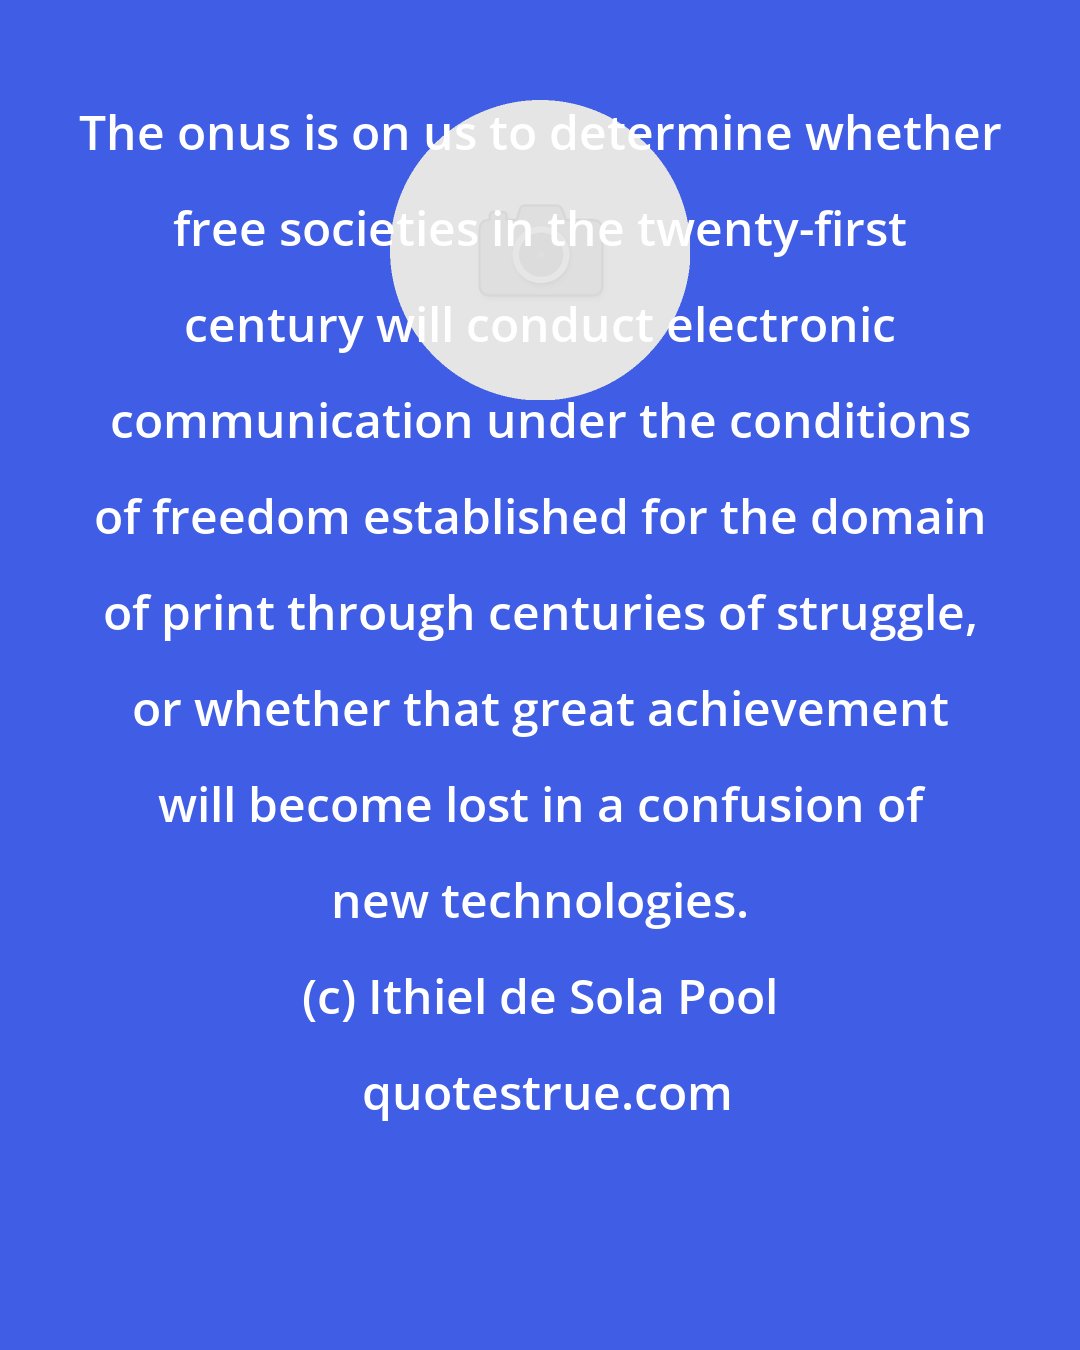 Ithiel de Sola Pool: The onus is on us to determine whether free societies in the twenty-first century will conduct electronic communication under the conditions of freedom established for the domain of print through centuries of struggle, or whether that great achievement will become lost in a confusion of new technologies.